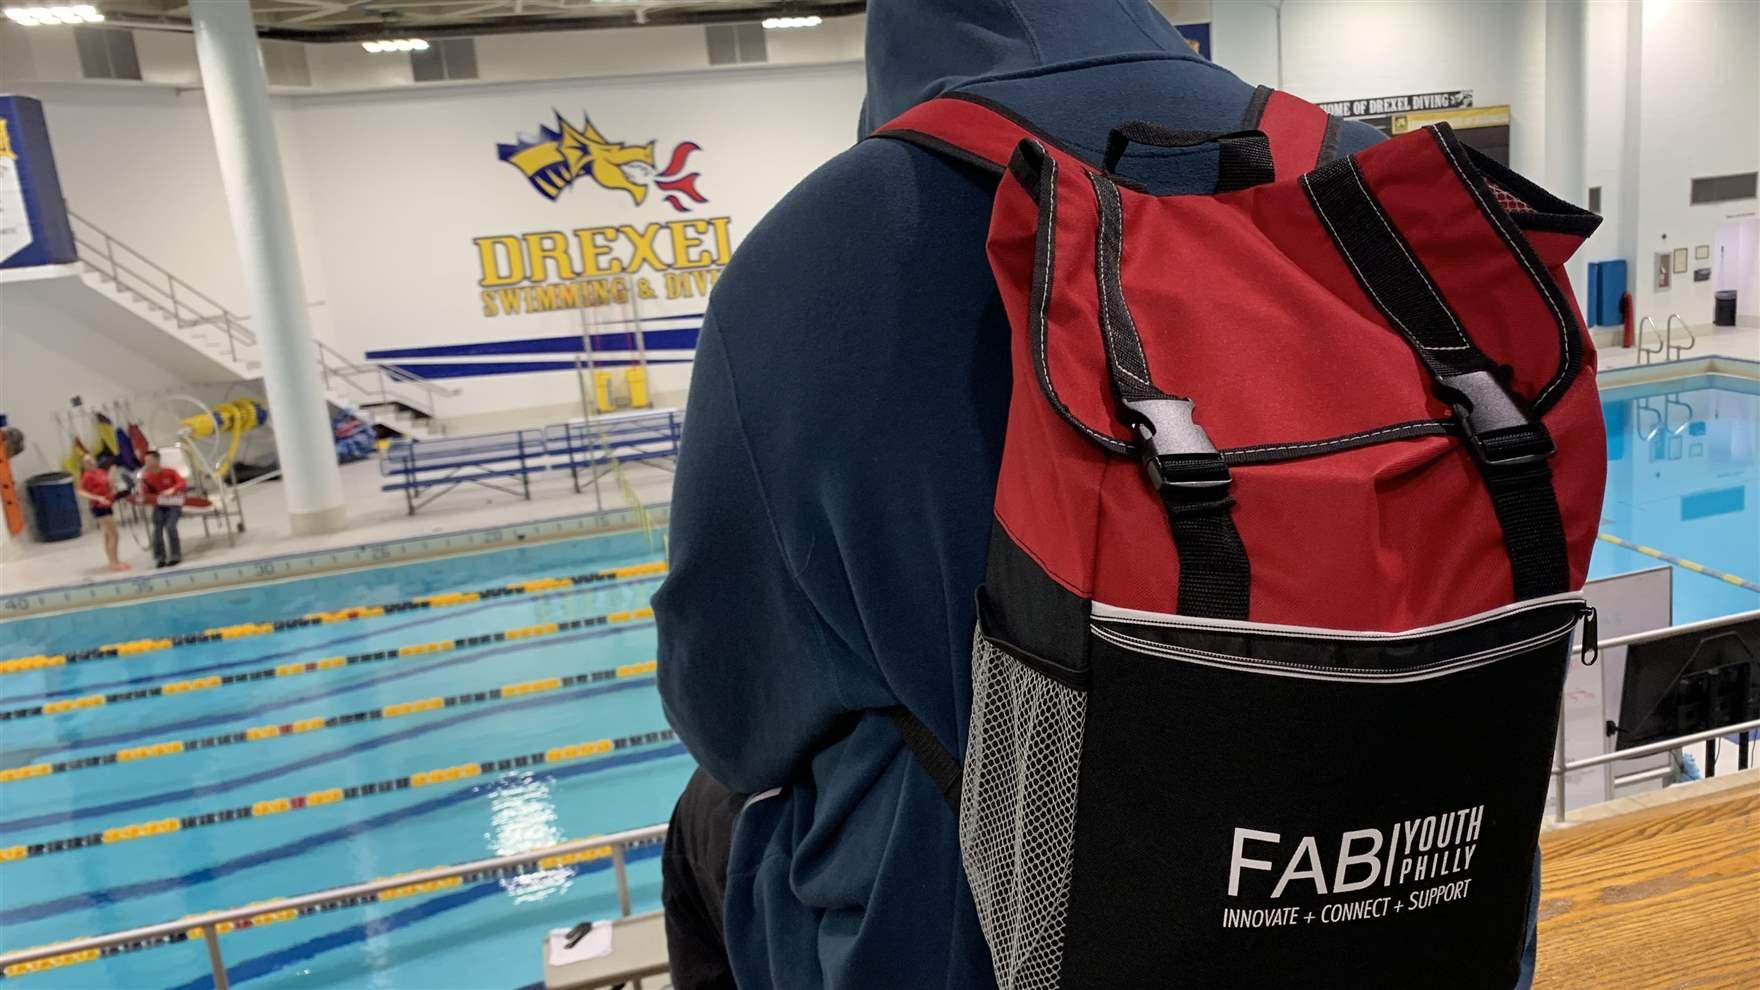 A teenager in a FAB Youth Philly backpack sits by the Drexel pool for training during this 12-week experience. Photo courtesy Rebecca Fabiano.